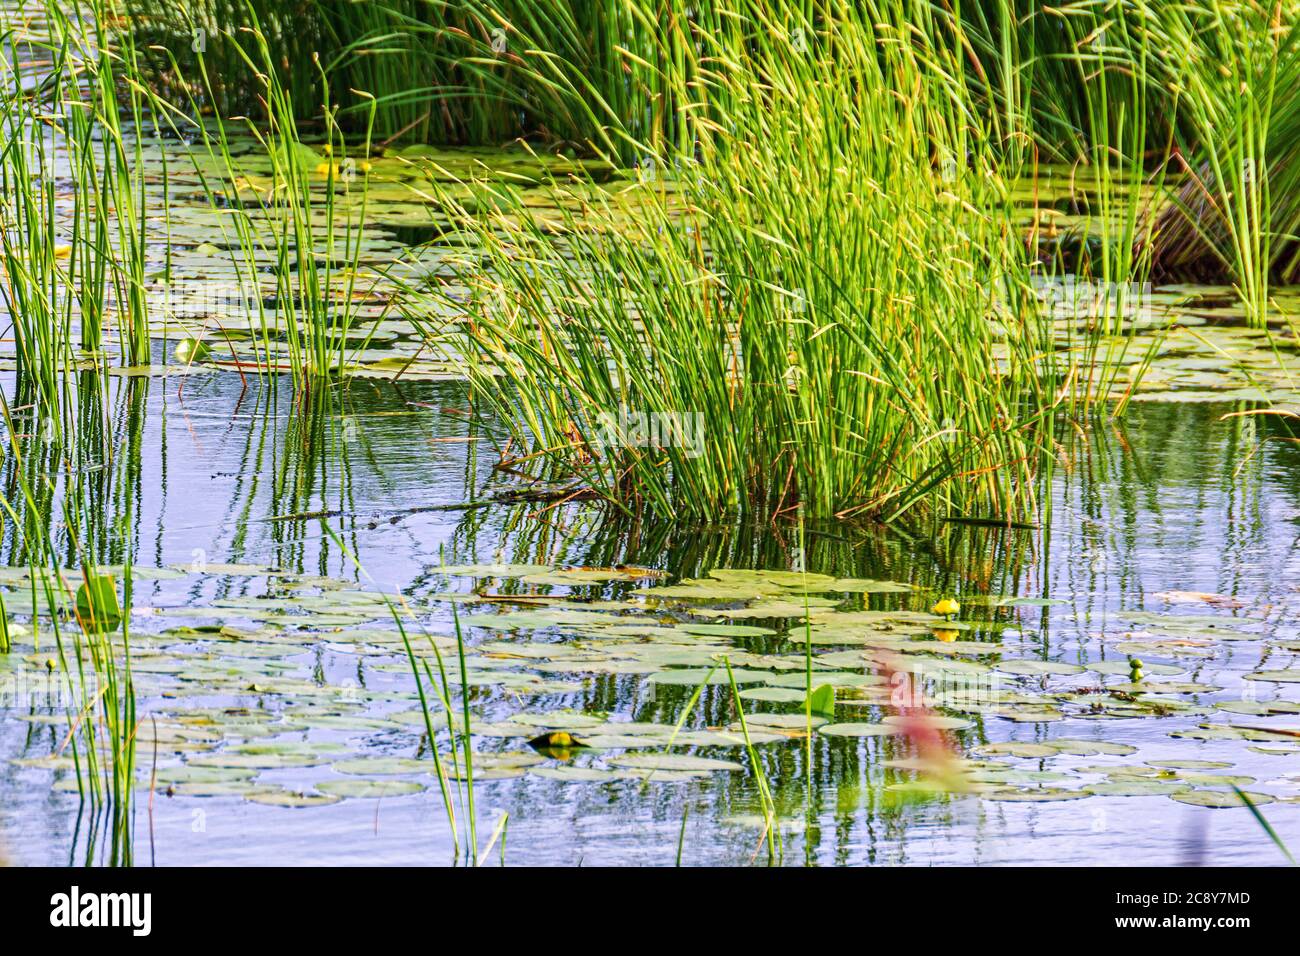 Landscape of a swampy reservoir overgrown with reeds and lilies. In shades of green. Stock Photo